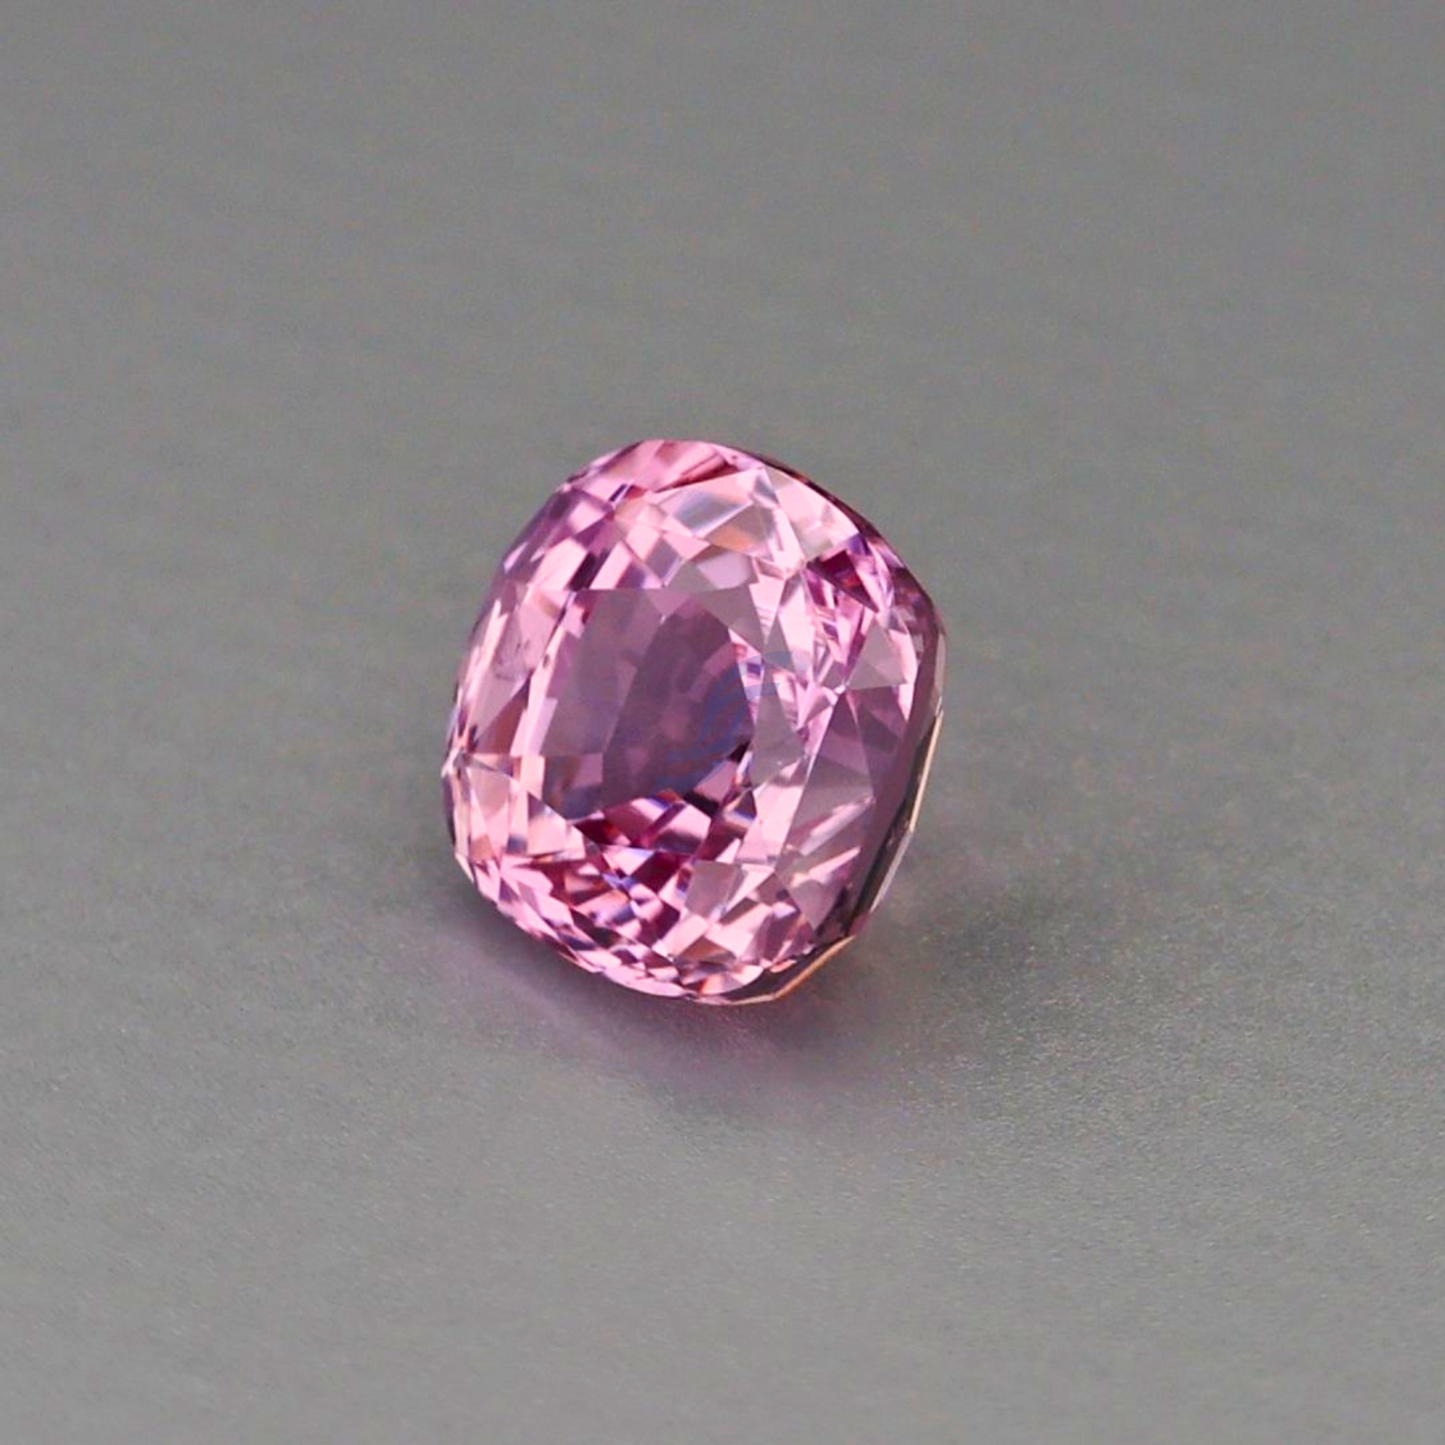 3.02CT Natural Pink Sapphire